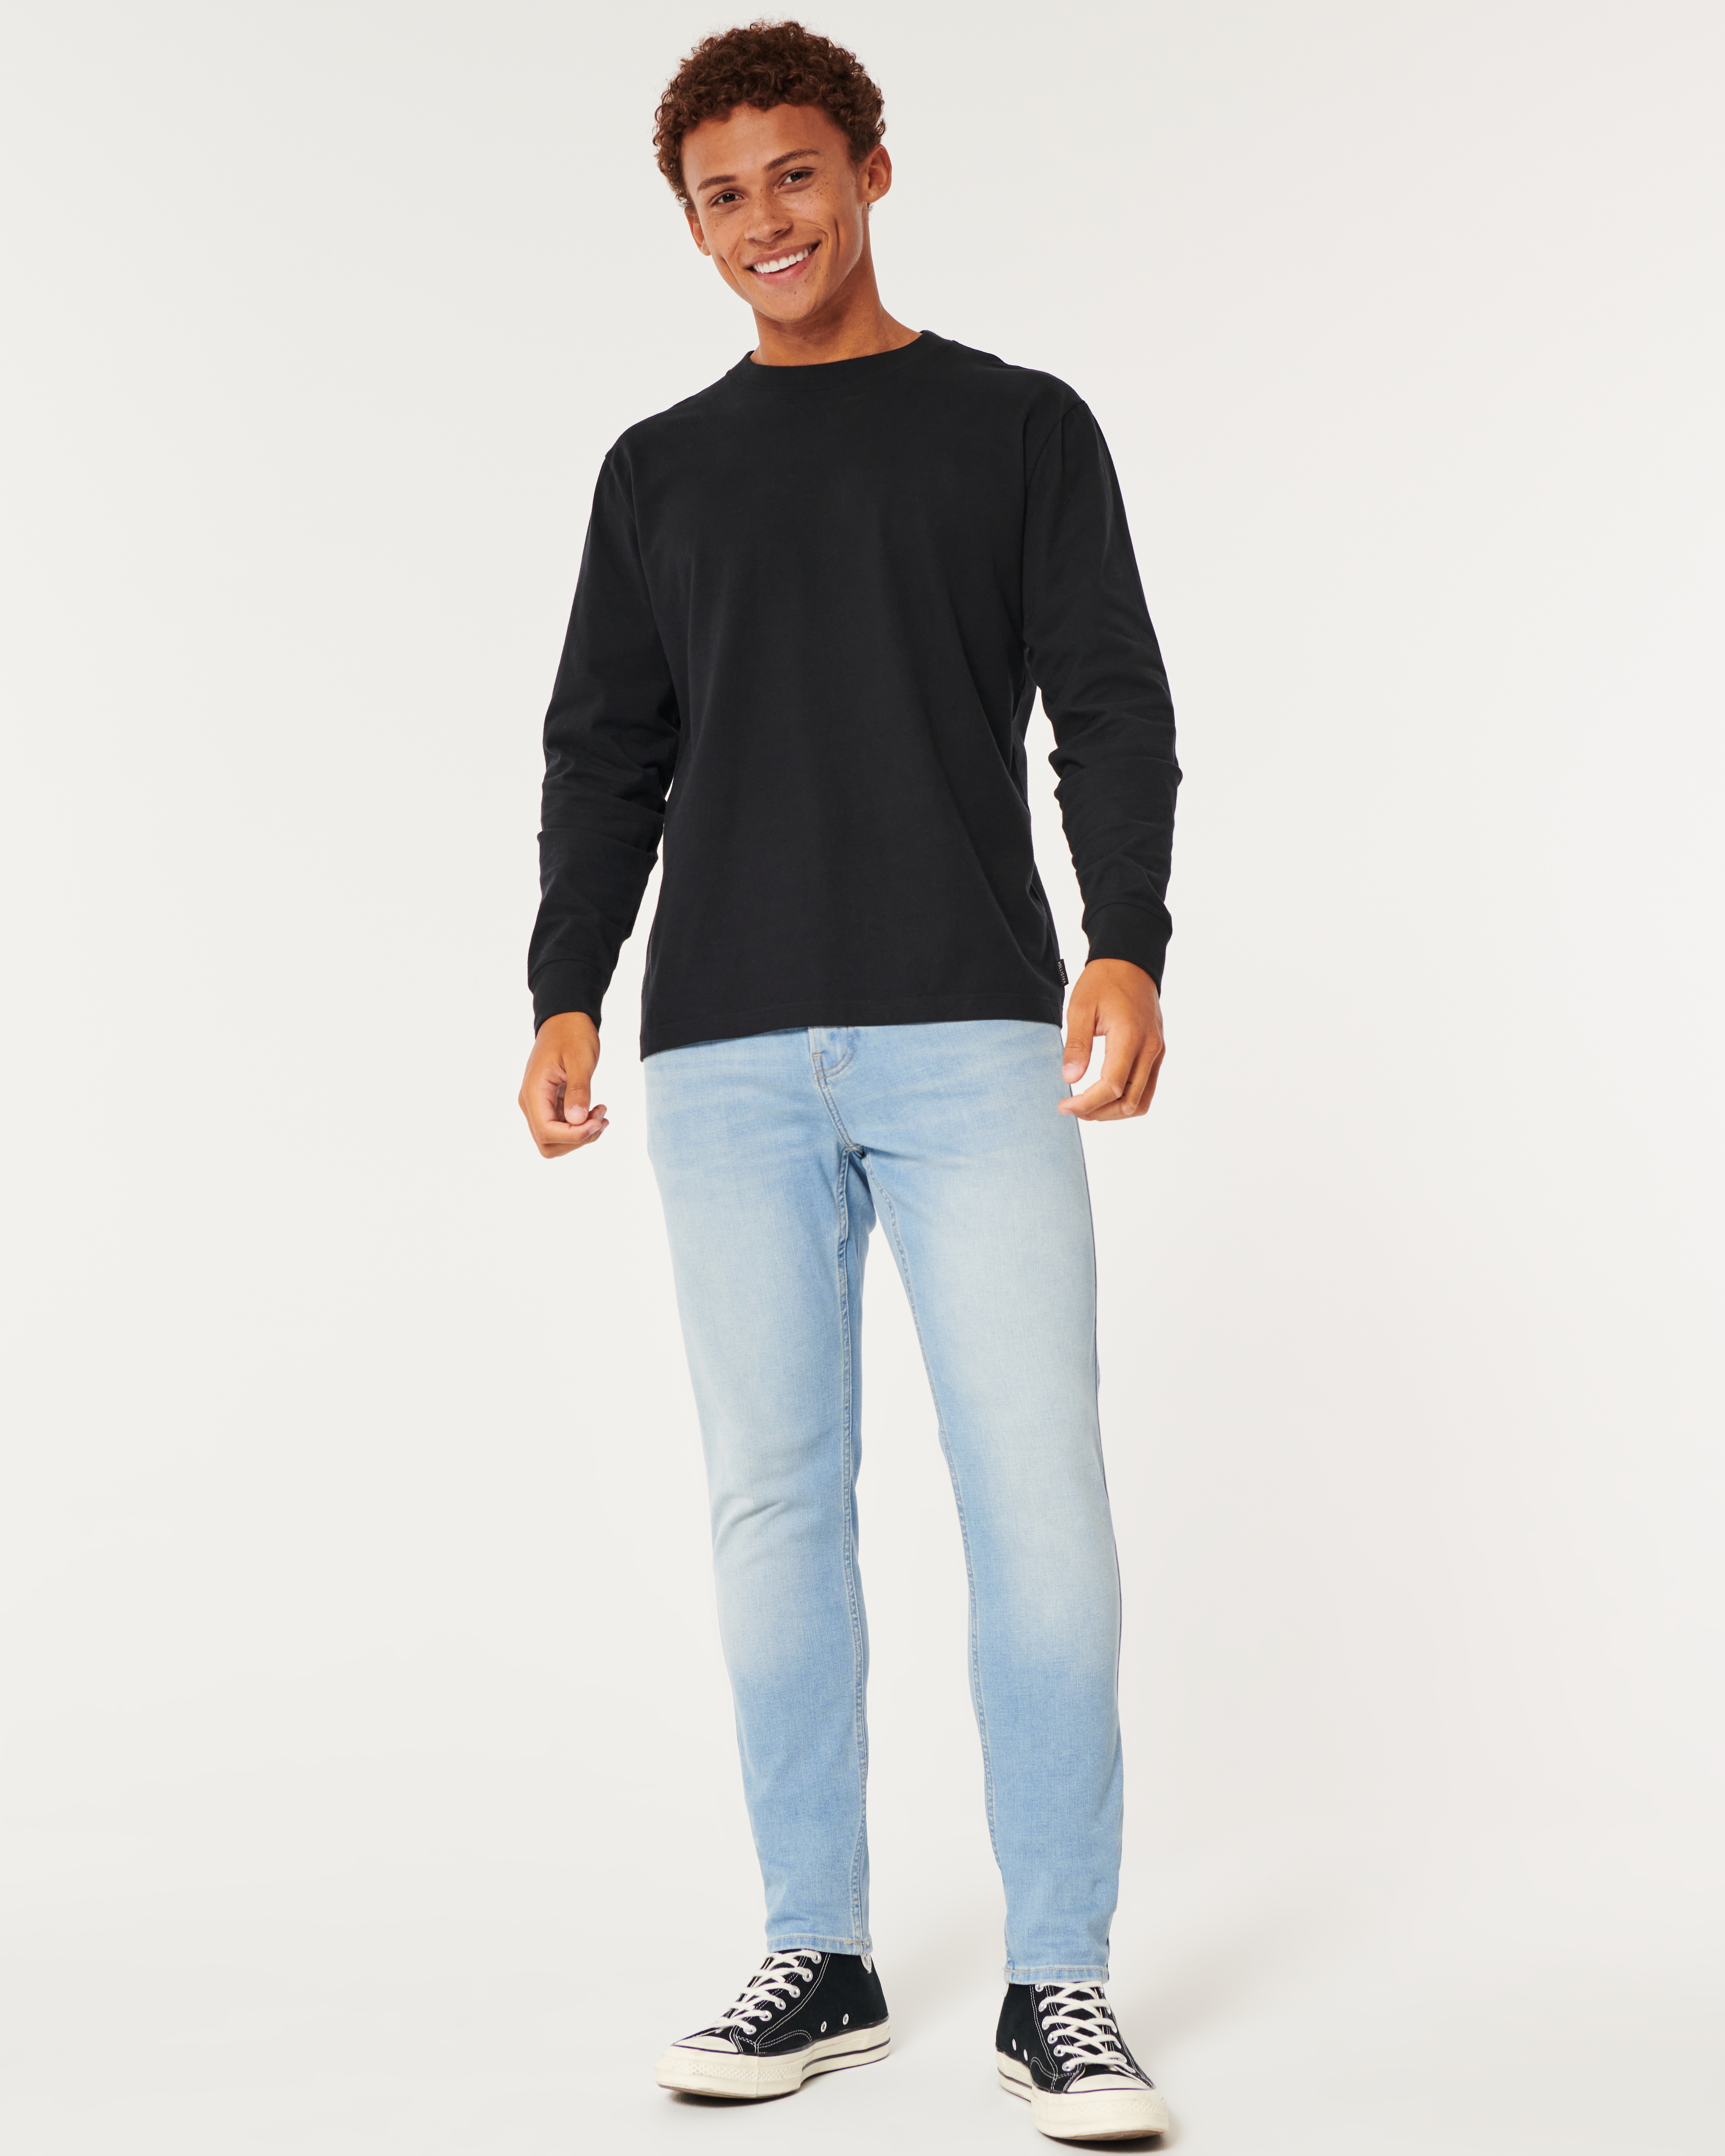 Black No Fade Athletic Skinny Jeans